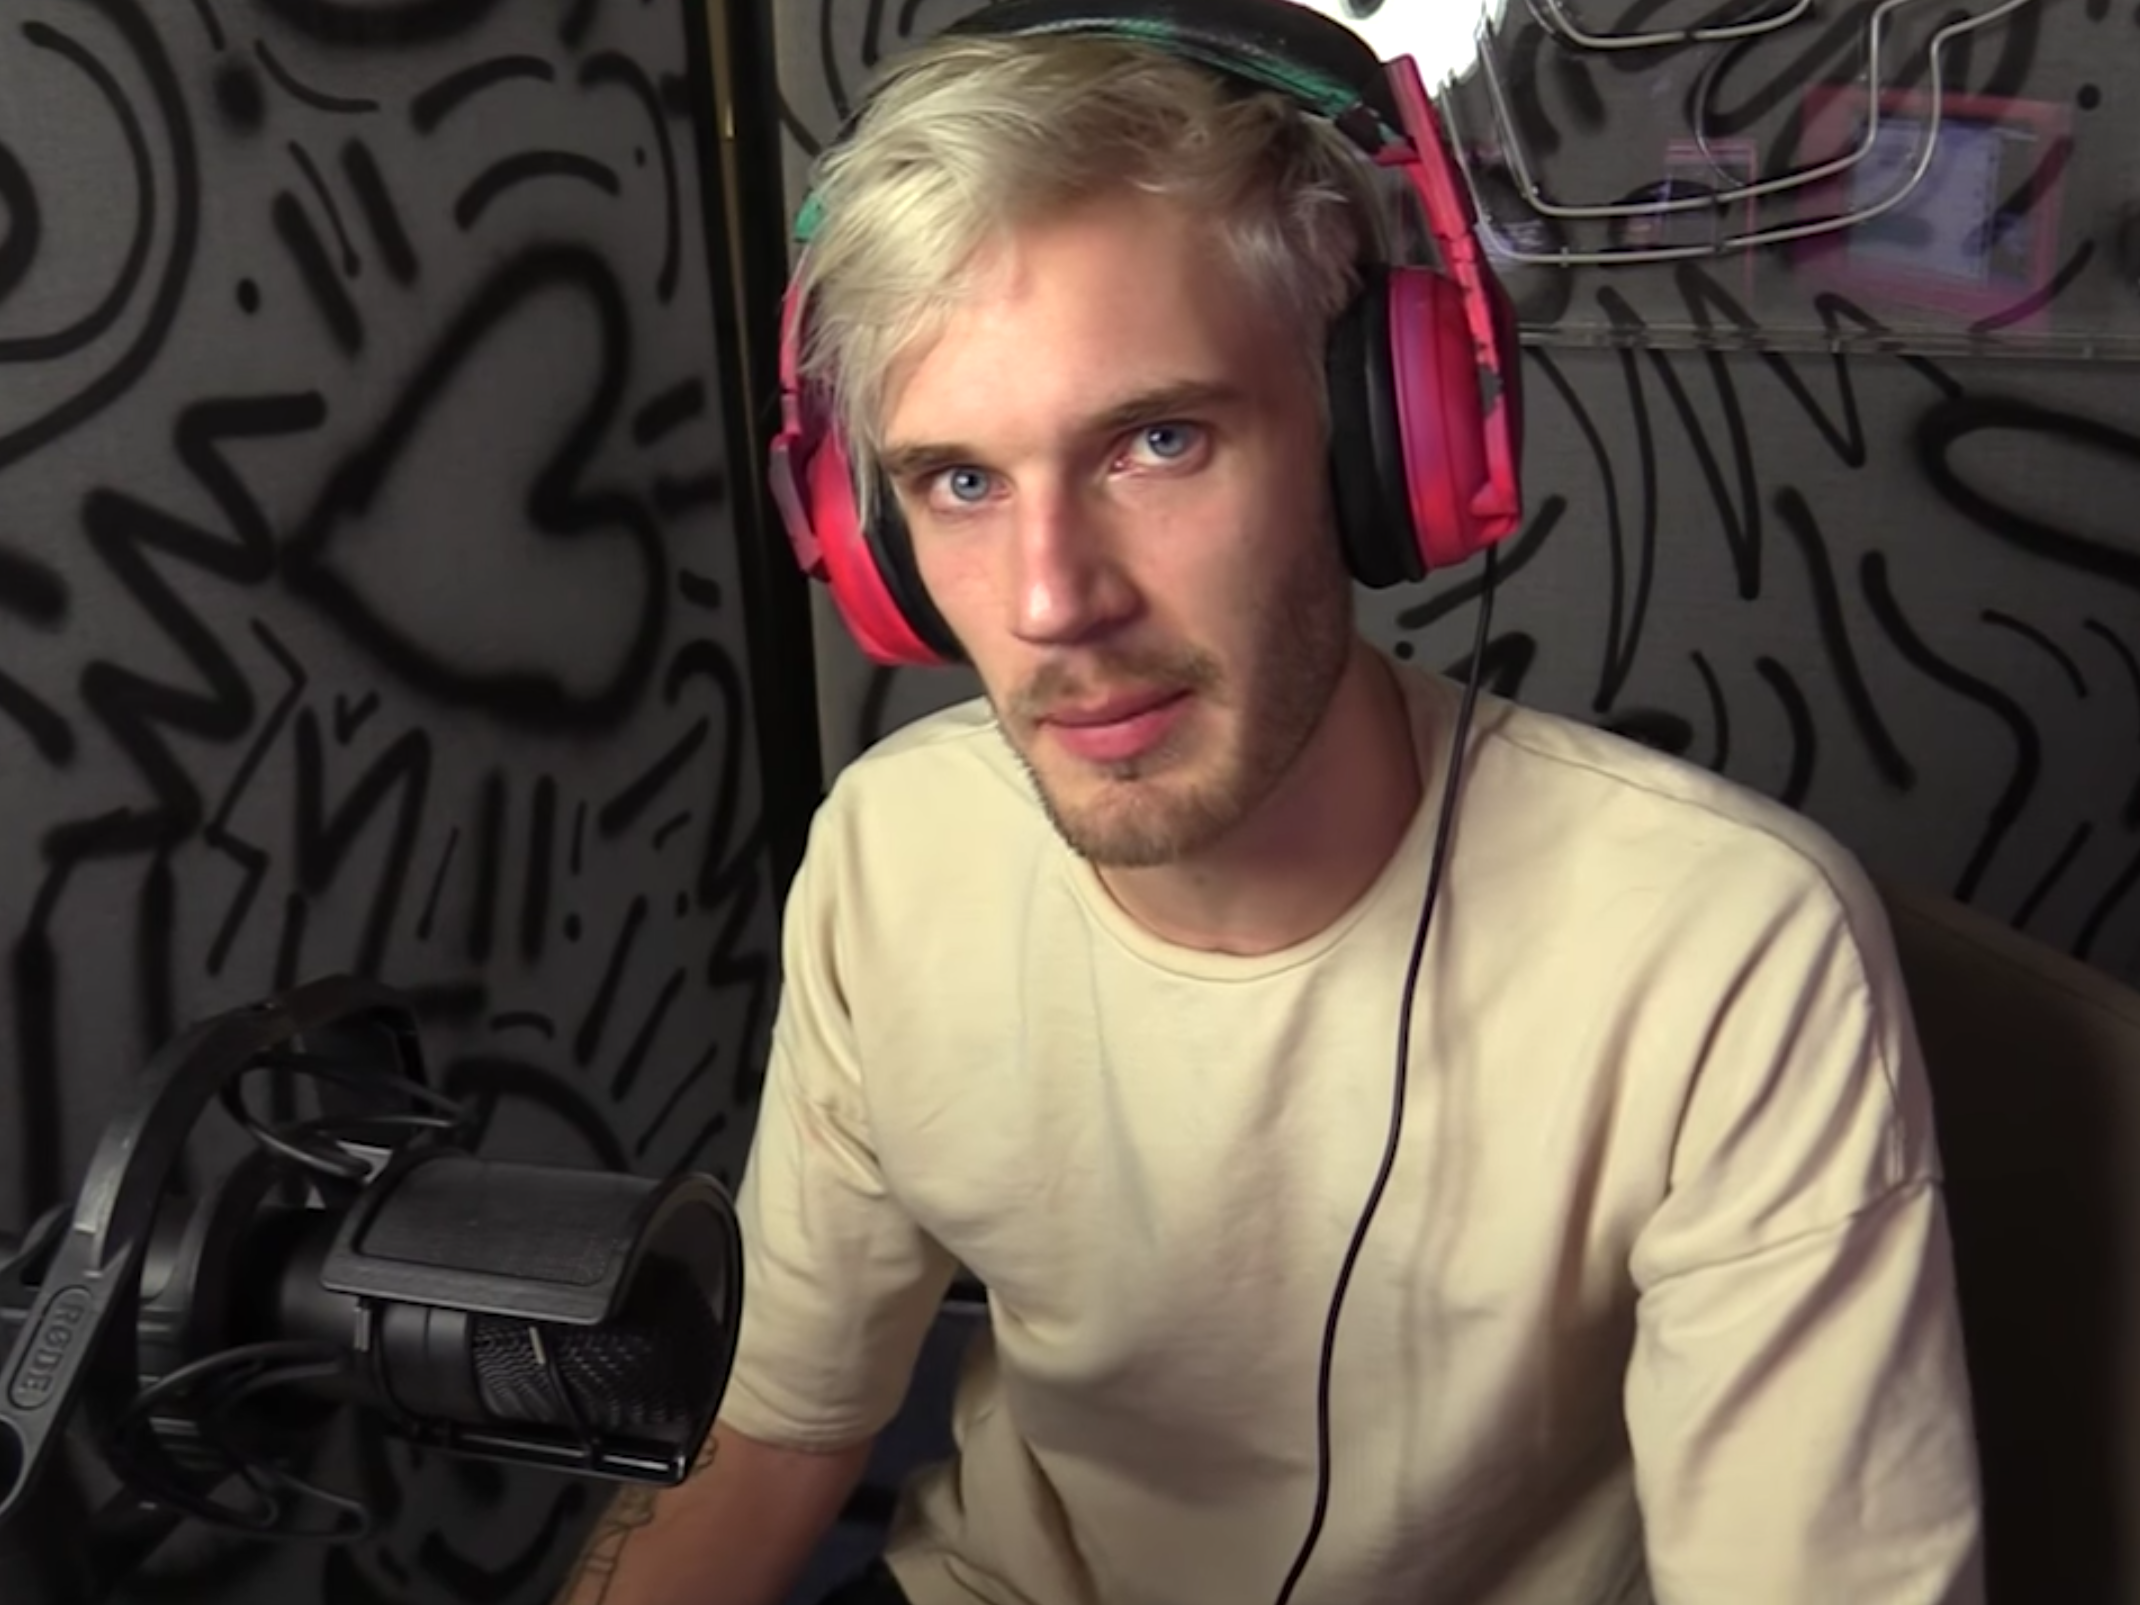 PewDiePie, the world’s most popular YouTuber, is back making more racist comments